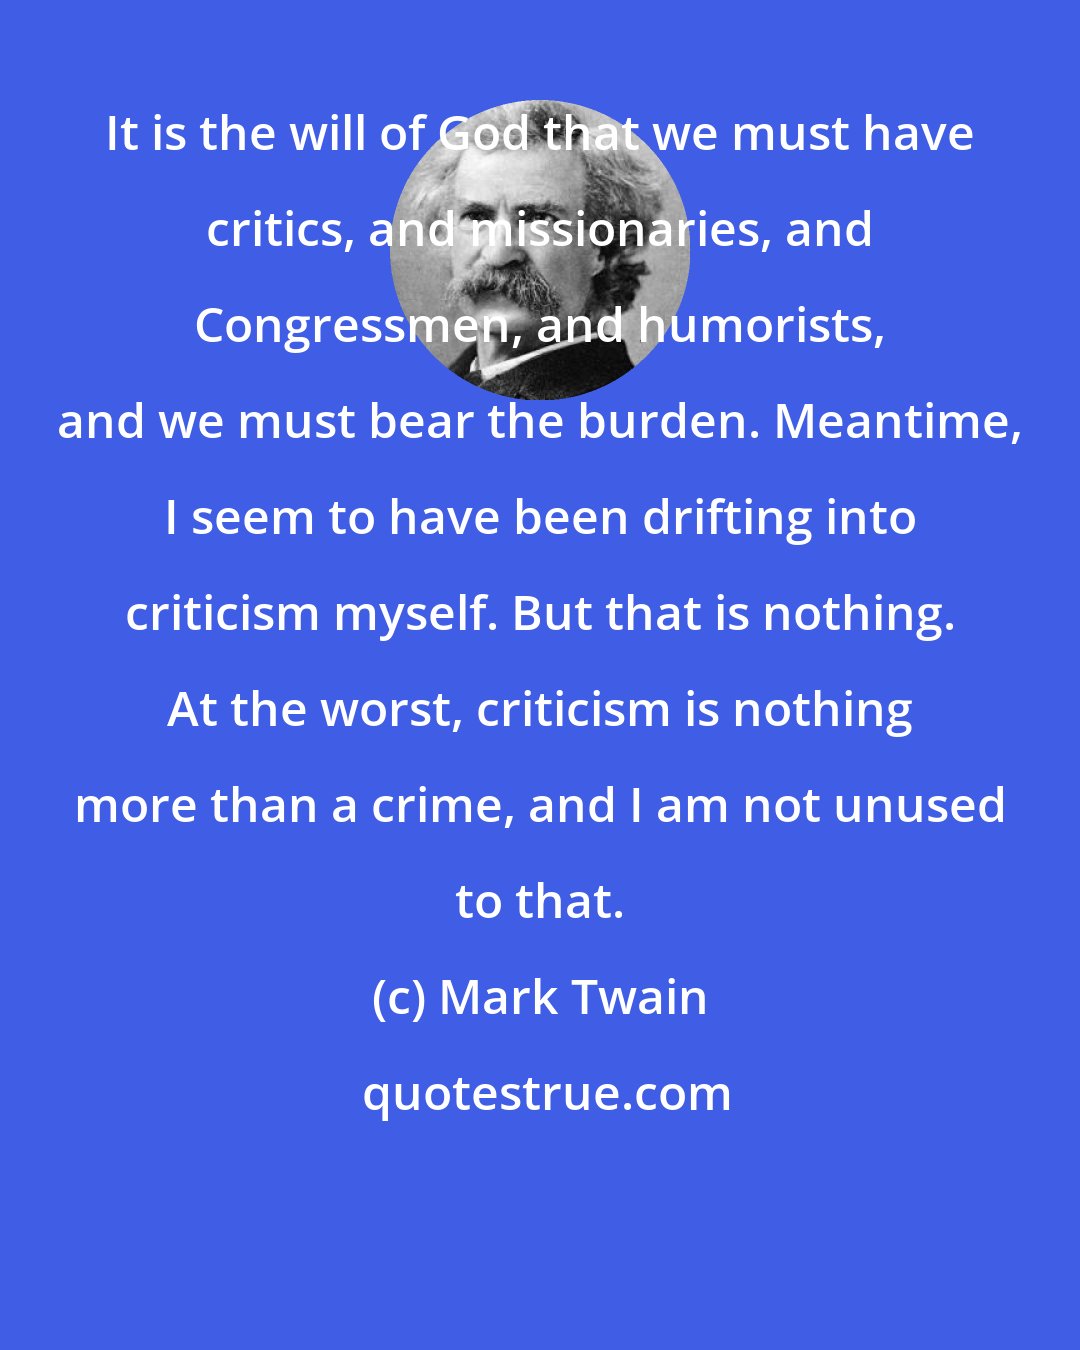 Mark Twain: It is the will of God that we must have critics, and missionaries, and Congressmen, and humorists, and we must bear the burden. Meantime, I seem to have been drifting into criticism myself. But that is nothing. At the worst, criticism is nothing more than a crime, and I am not unused to that.